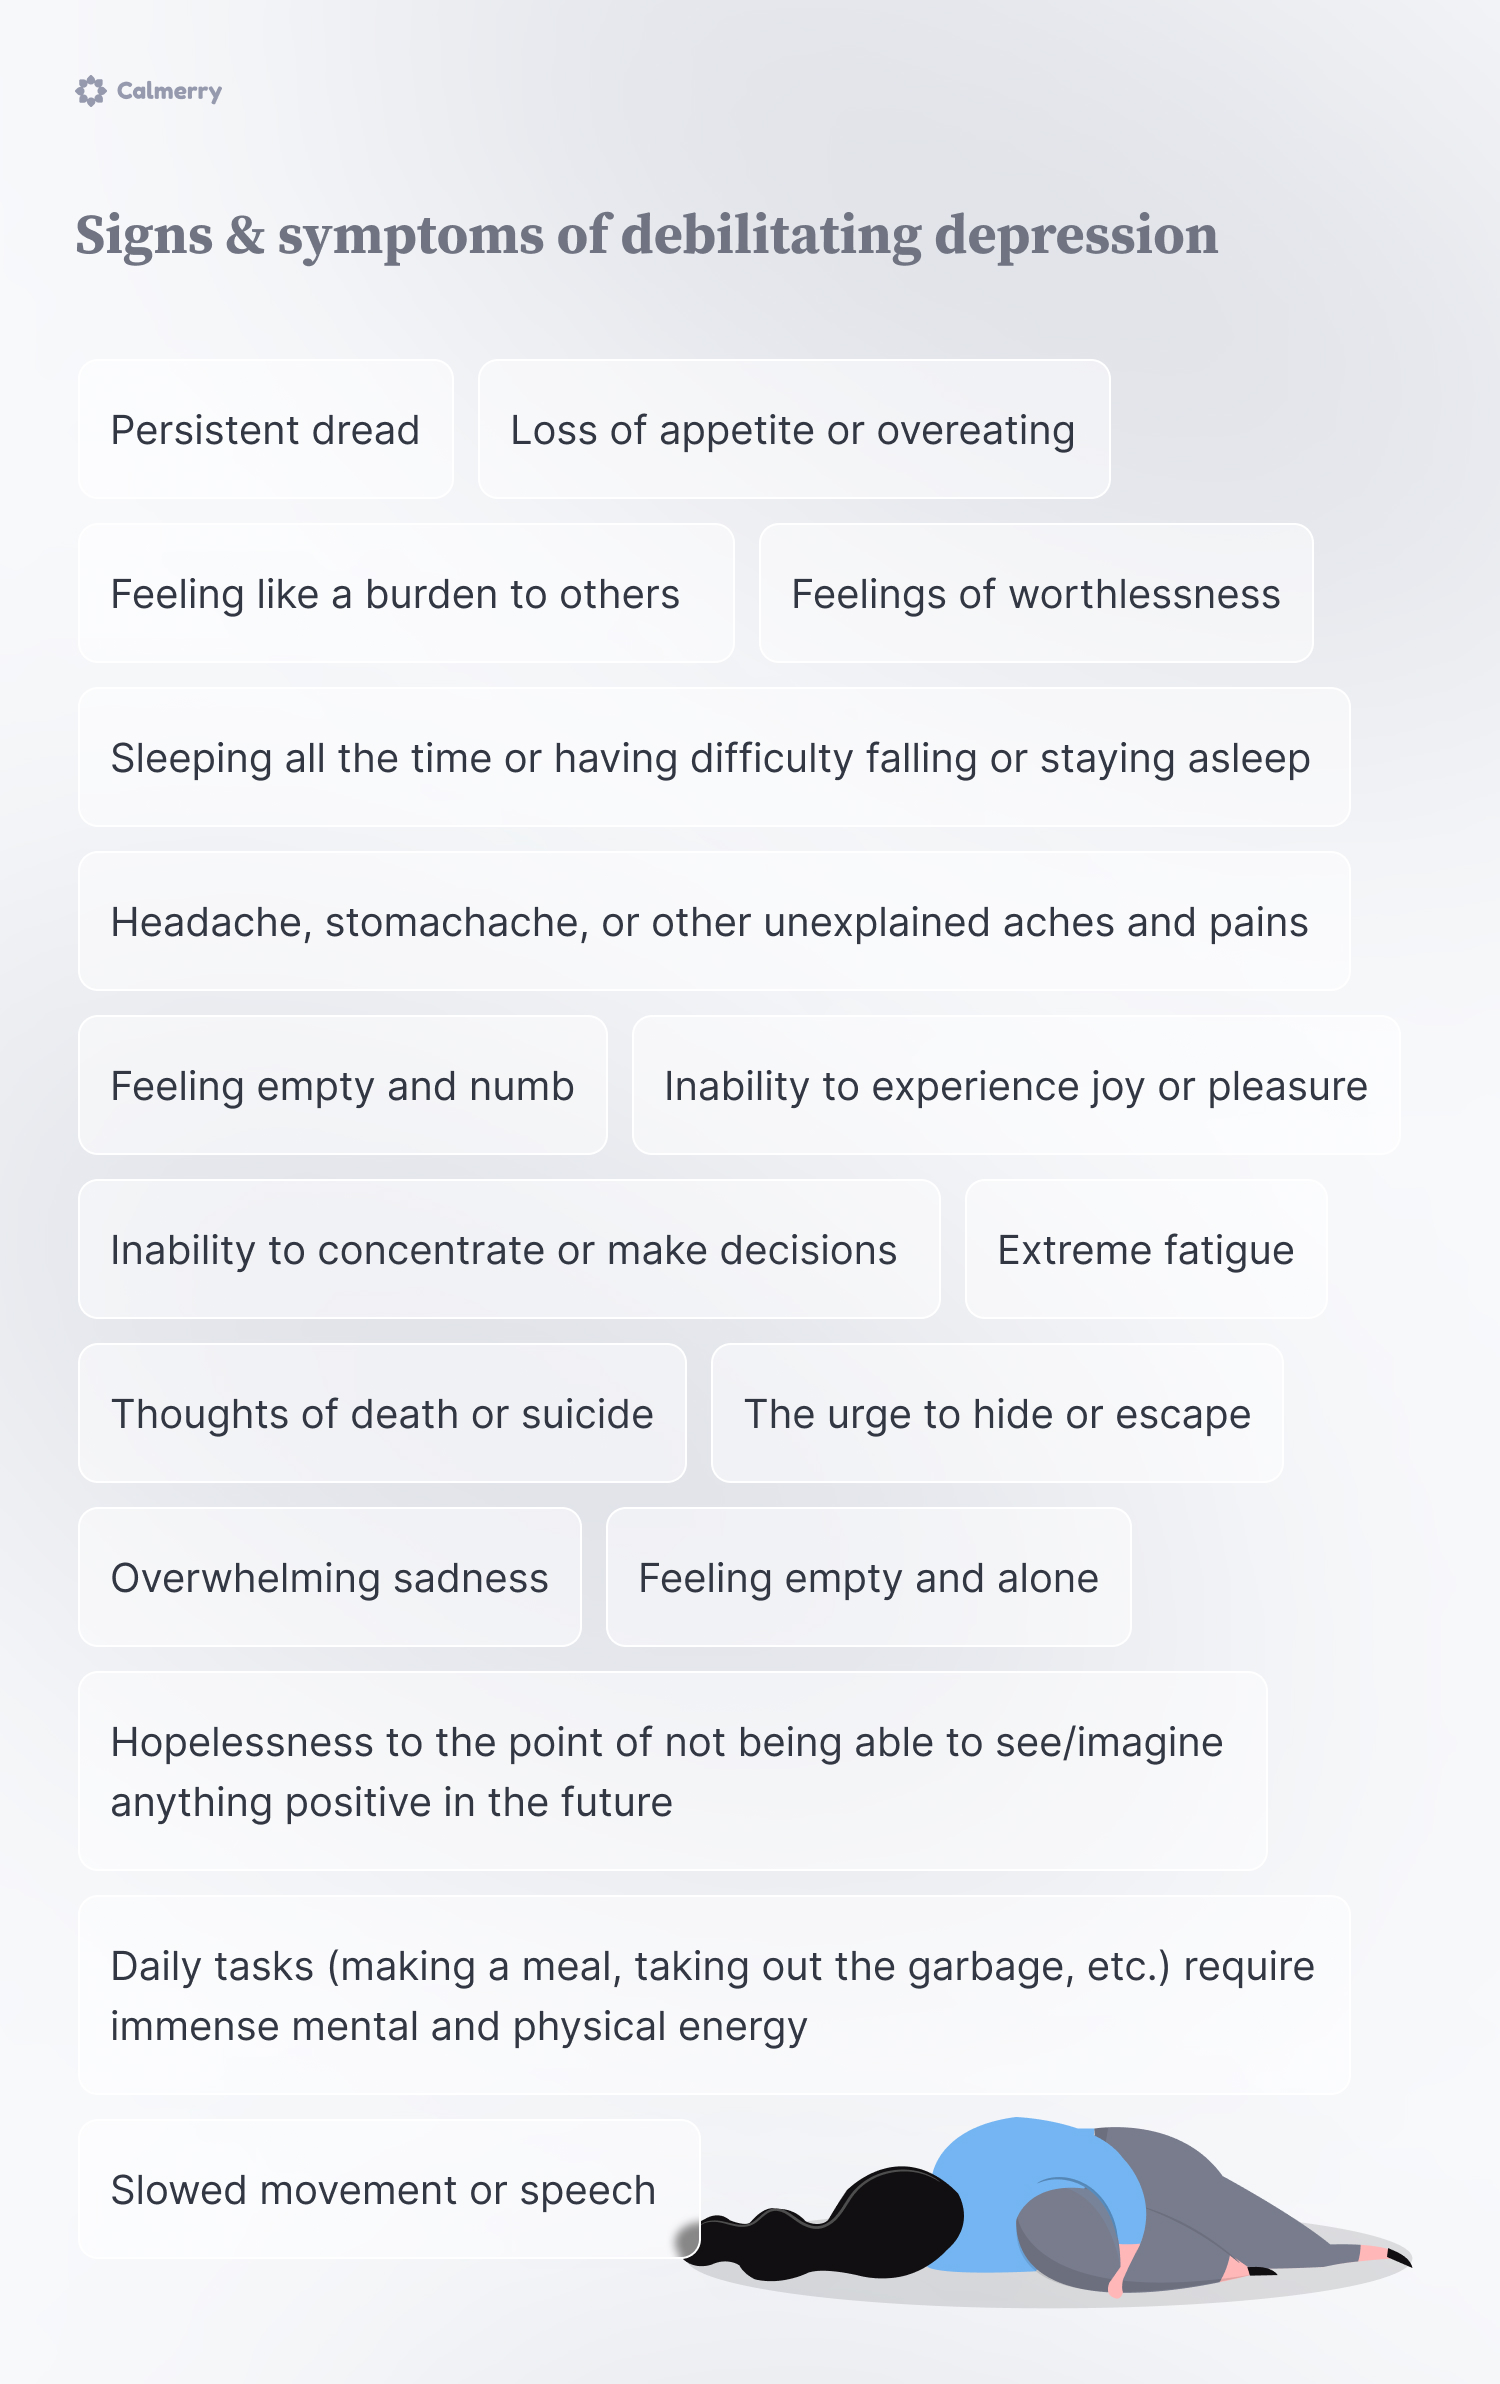 Signs & symptoms of debilitating depression

Daily tasks (making a meal, taking out the garbage, etc.) require immense mental and physical energy
Hopelessness to the point of not being able to see/imagine anything positive in the future
Headache, stomachache, or other unexplained aches and pains
Sleeping all the time or having difficulty falling or staying asleep
Inability to concentrate or make decisions
Inability to experience joy or pleasure
Feeling like a burden to others
Loss of appetite or overeating
Slowed movement or speech  
Thoughts of death or suicide
The urge to hide or escape 
Feelings of worthlessness
Feeling empty and numb
Feeling empty and alone
Overwhelming sadness 
Persistent dread 
Extreme fatigue